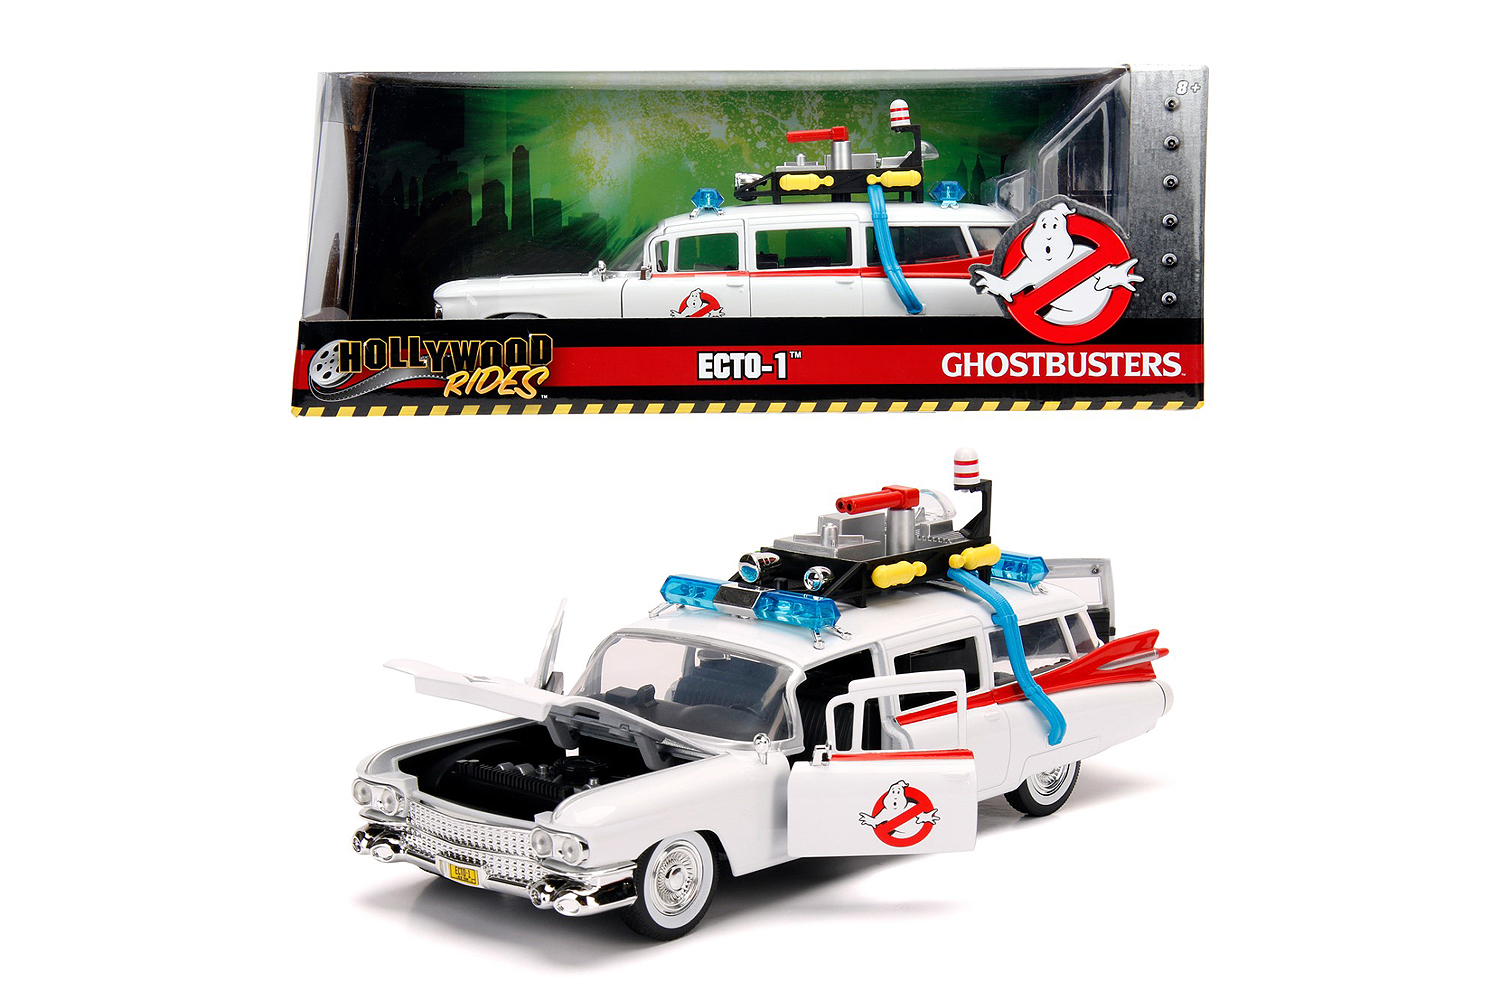 GHOSTBUSTERS DIECAST MODEL 1/24 1959 CADILLAC ECTO-1